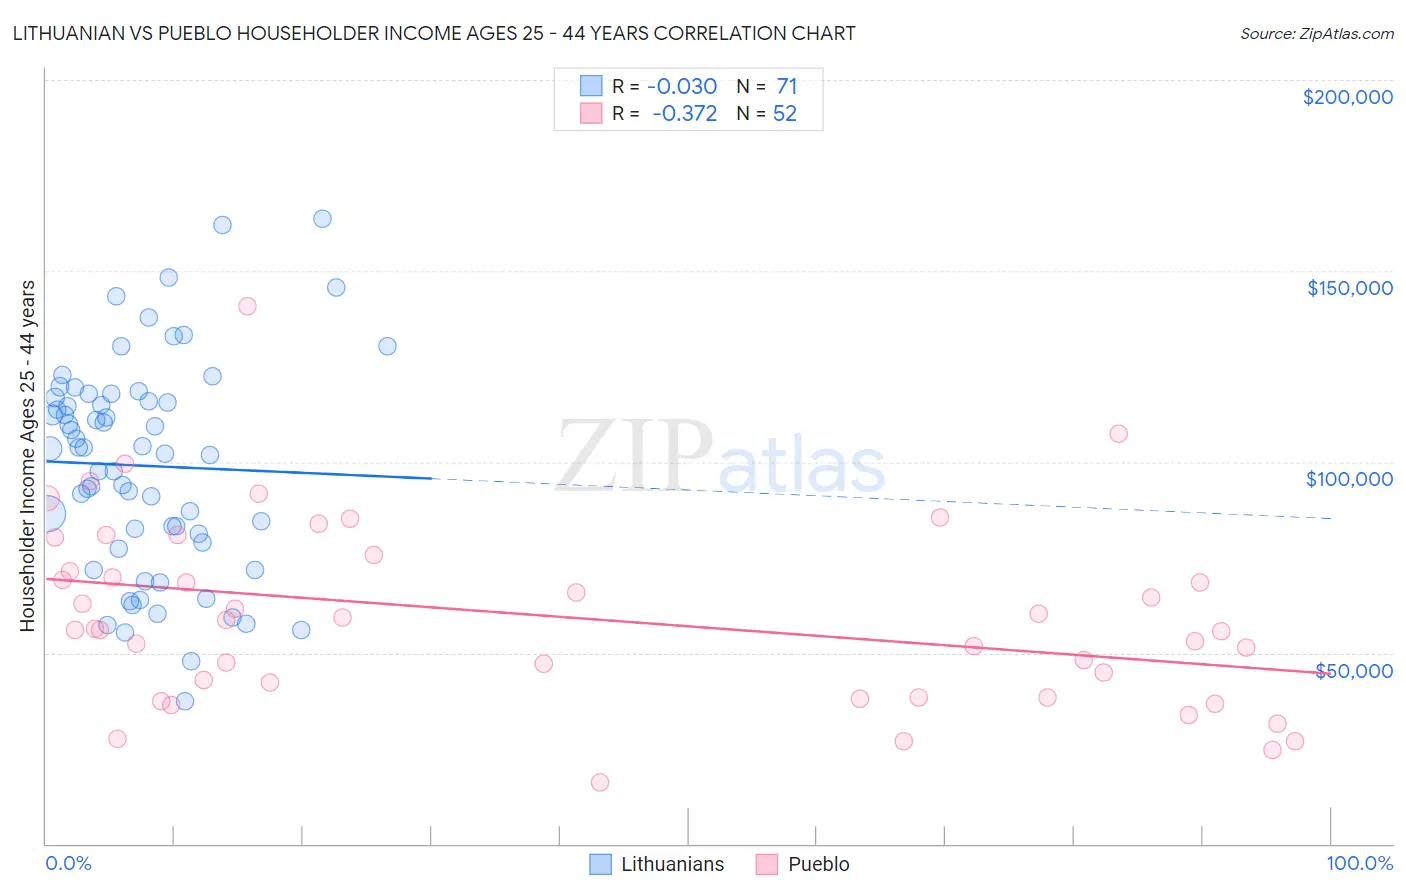 Lithuanian vs Pueblo Householder Income Ages 25 - 44 years